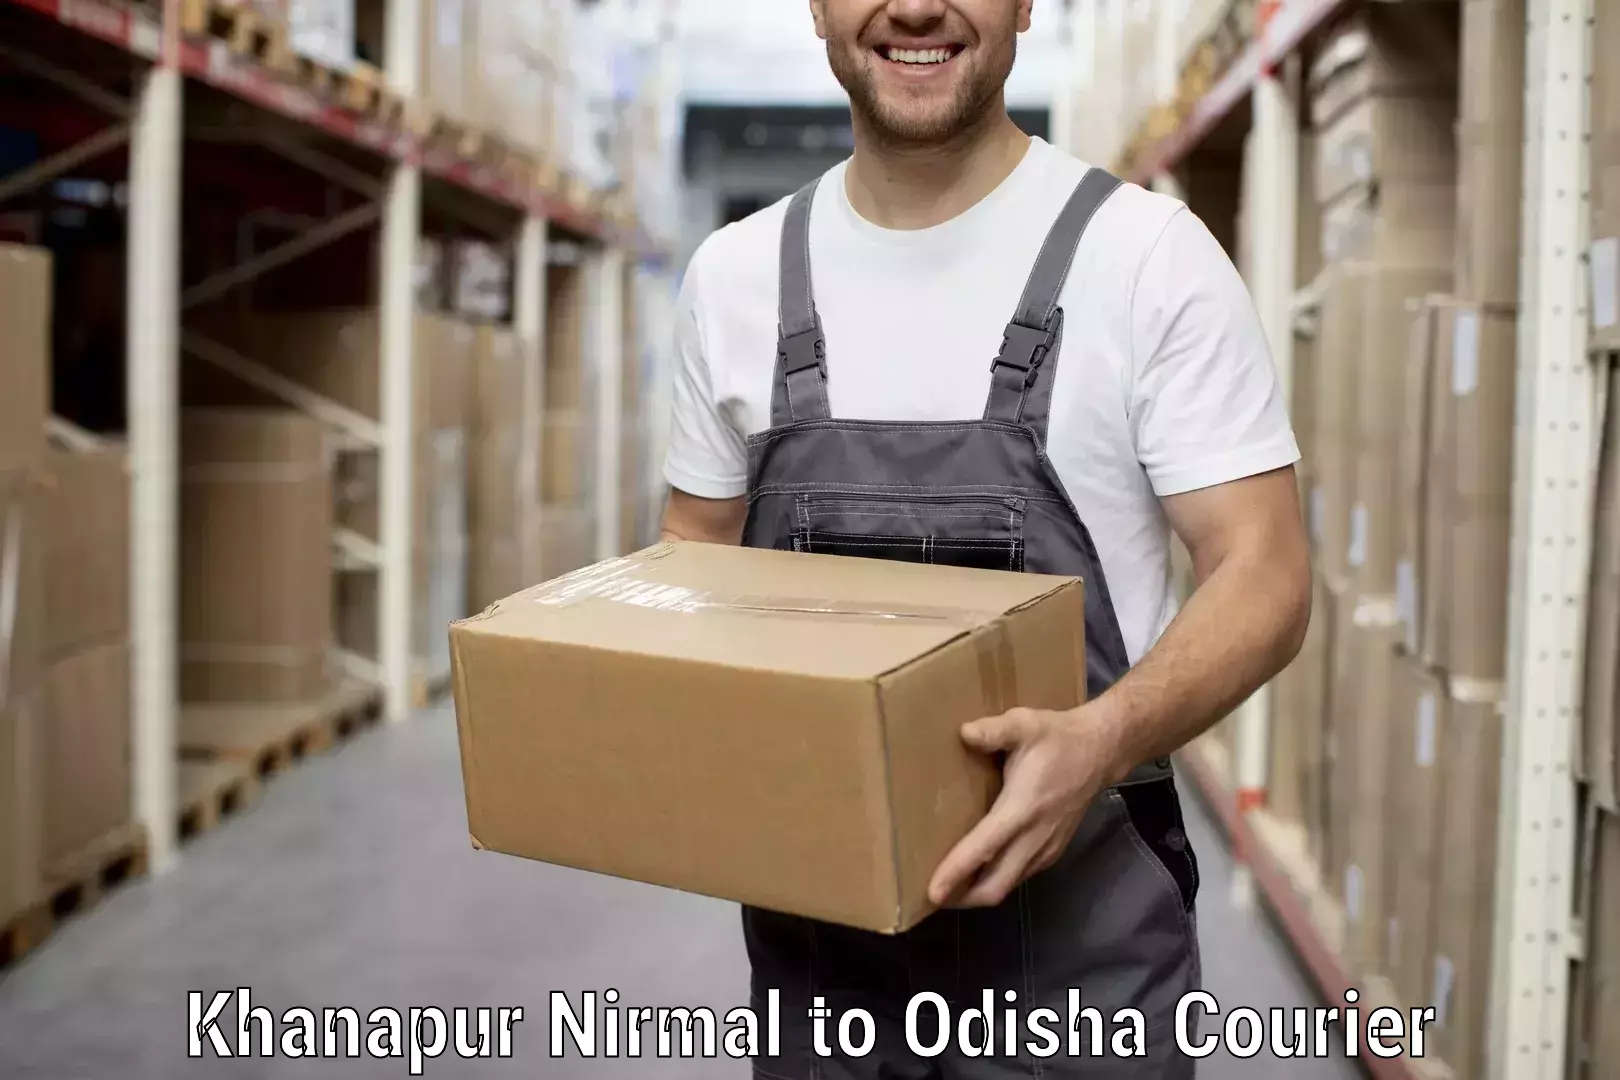 Furniture relocation services Khanapur Nirmal to Kalapathar Cuttack